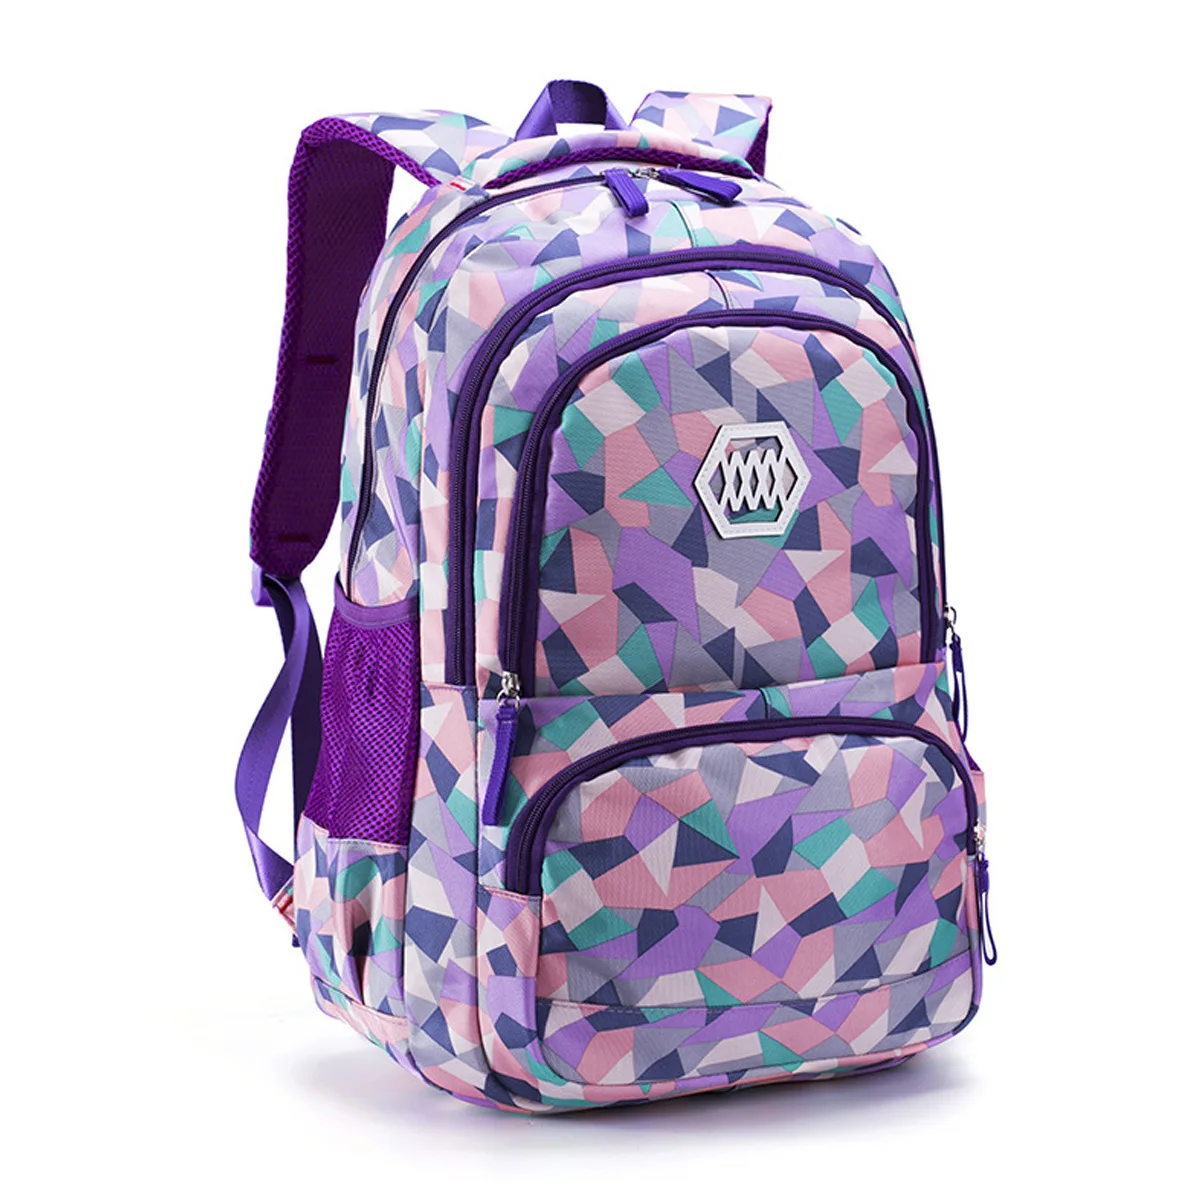 

Wholesale Mochila Geometric Fragments Bookbags College Laptop Girls Back bag School bags Backpack with teenage kids, Various colours